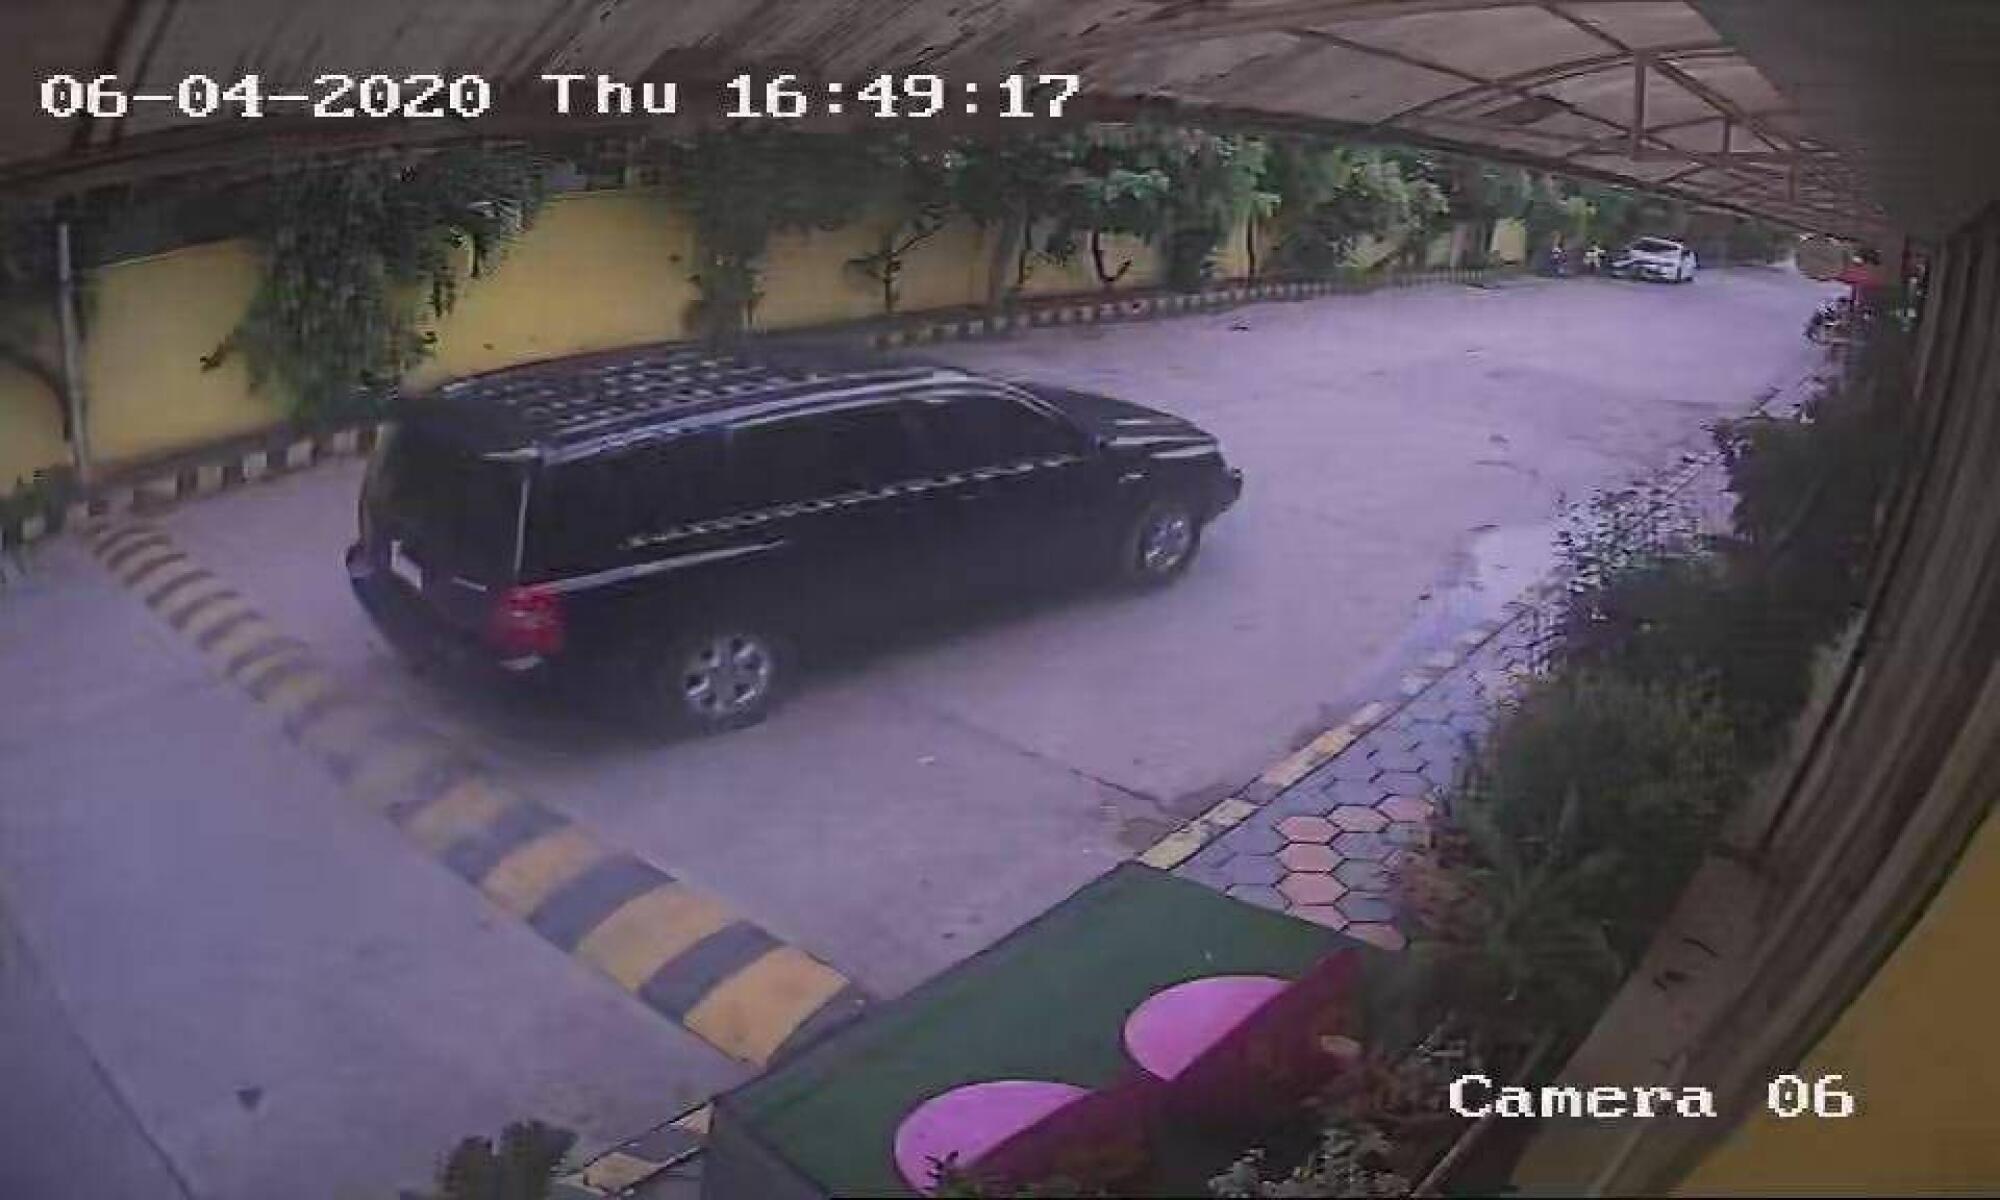 Security camera footage shows a Toyota SUV leaving the spot where Wanchalearm Satsaksit